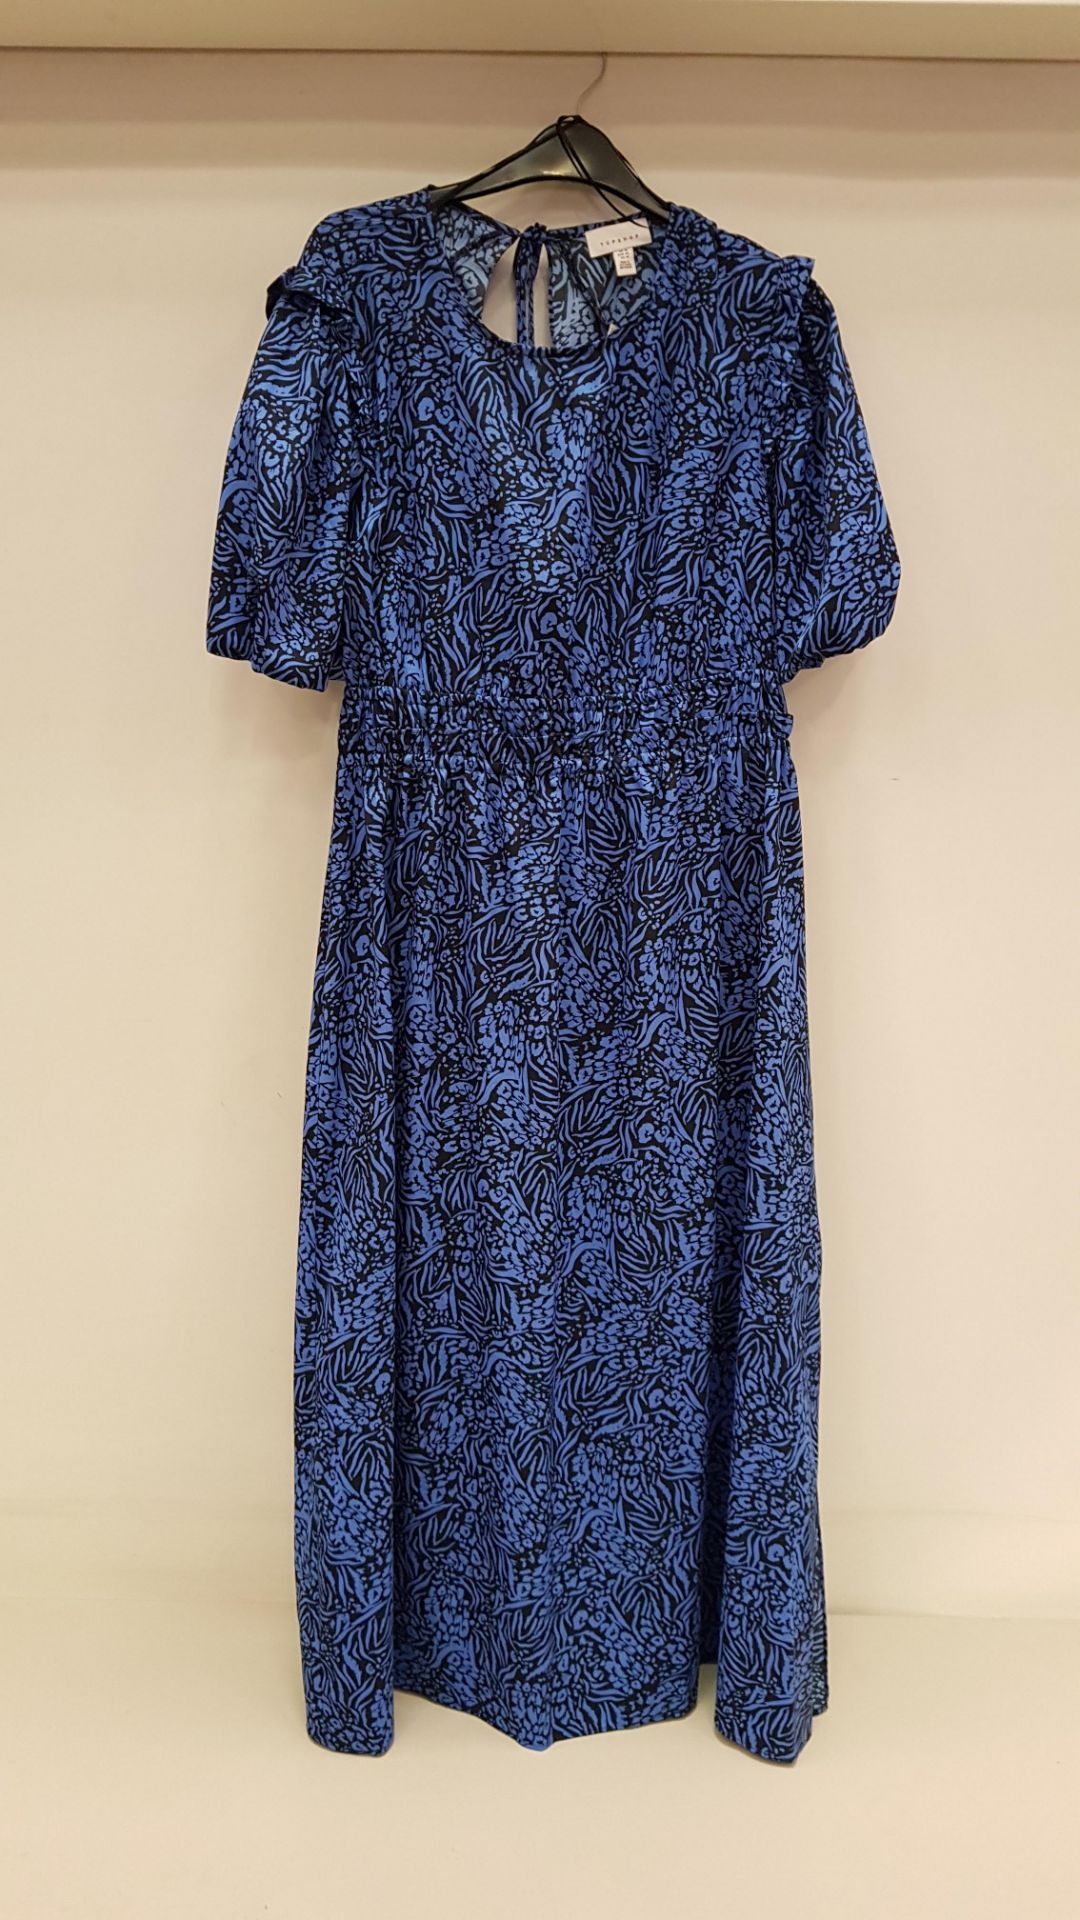 20 X BRAND NEW DOROTHY PERKINS BLUE AND BLACK DRESSES IN VARIOUS SIZES RRP £45.00 (TOTAL RRP £900.